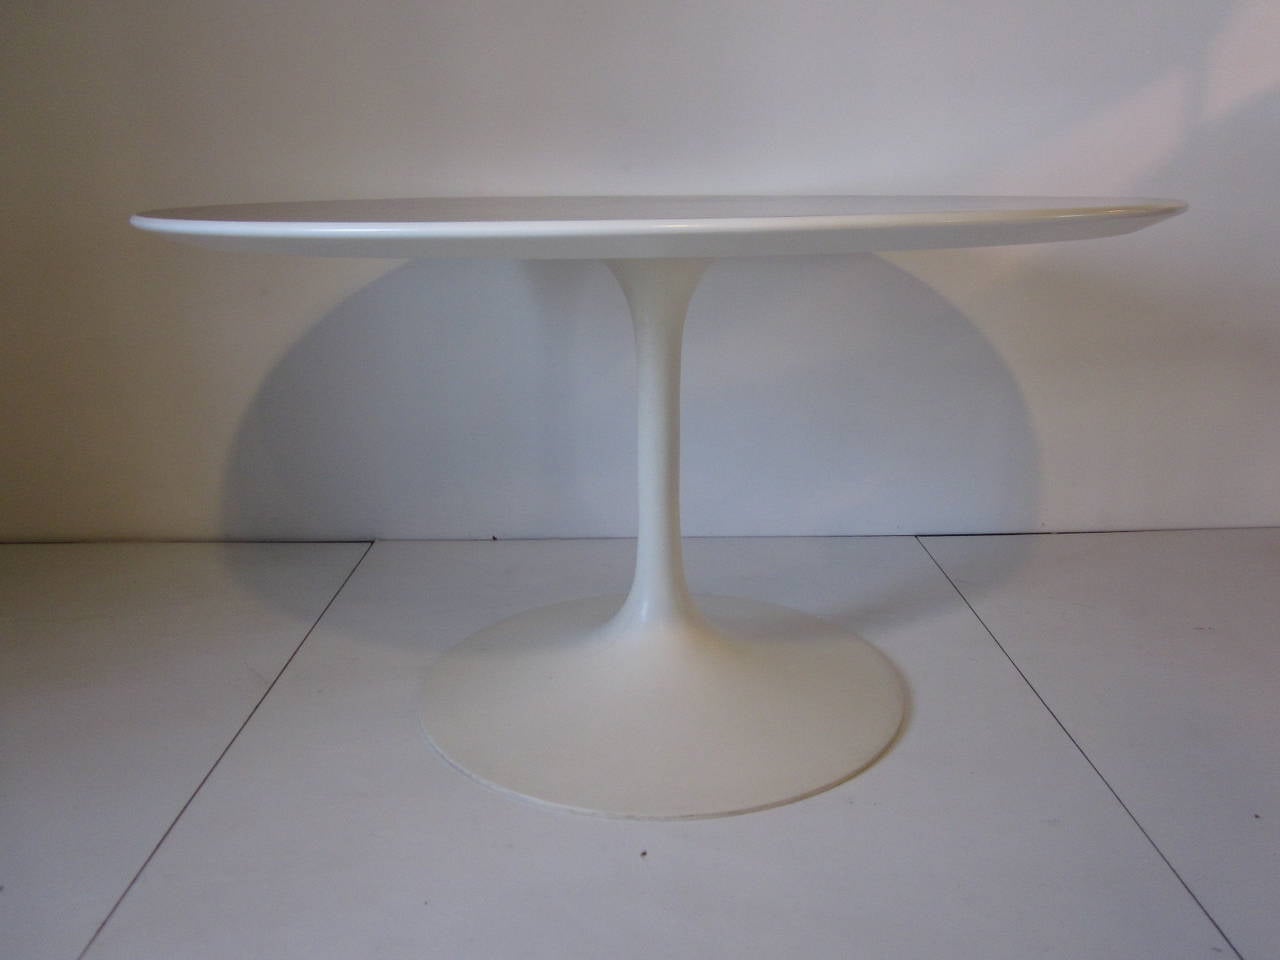 A Saarinen tulip dining table with well grained walnut top, beveled edge and a tulip metal base in a satin white, manufactured by Knoll International.